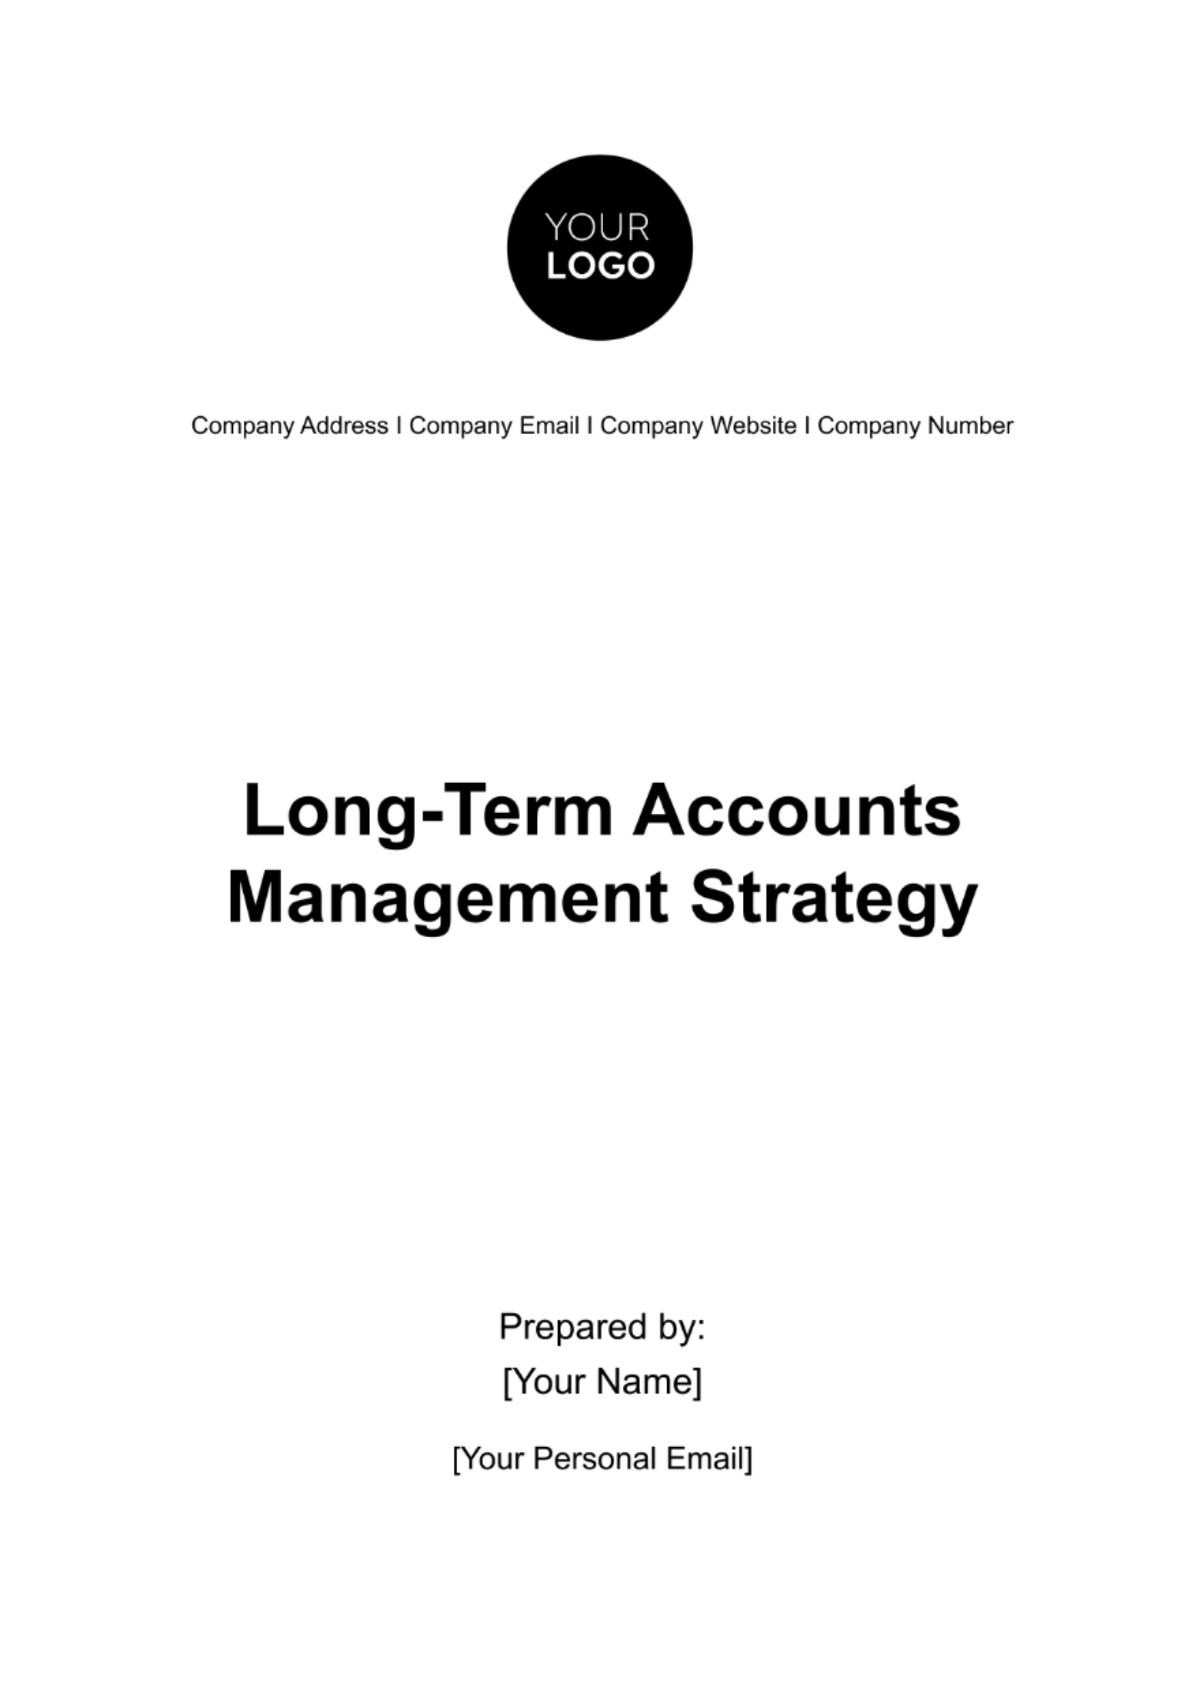 Long-Term Accounts Management Strategy Template